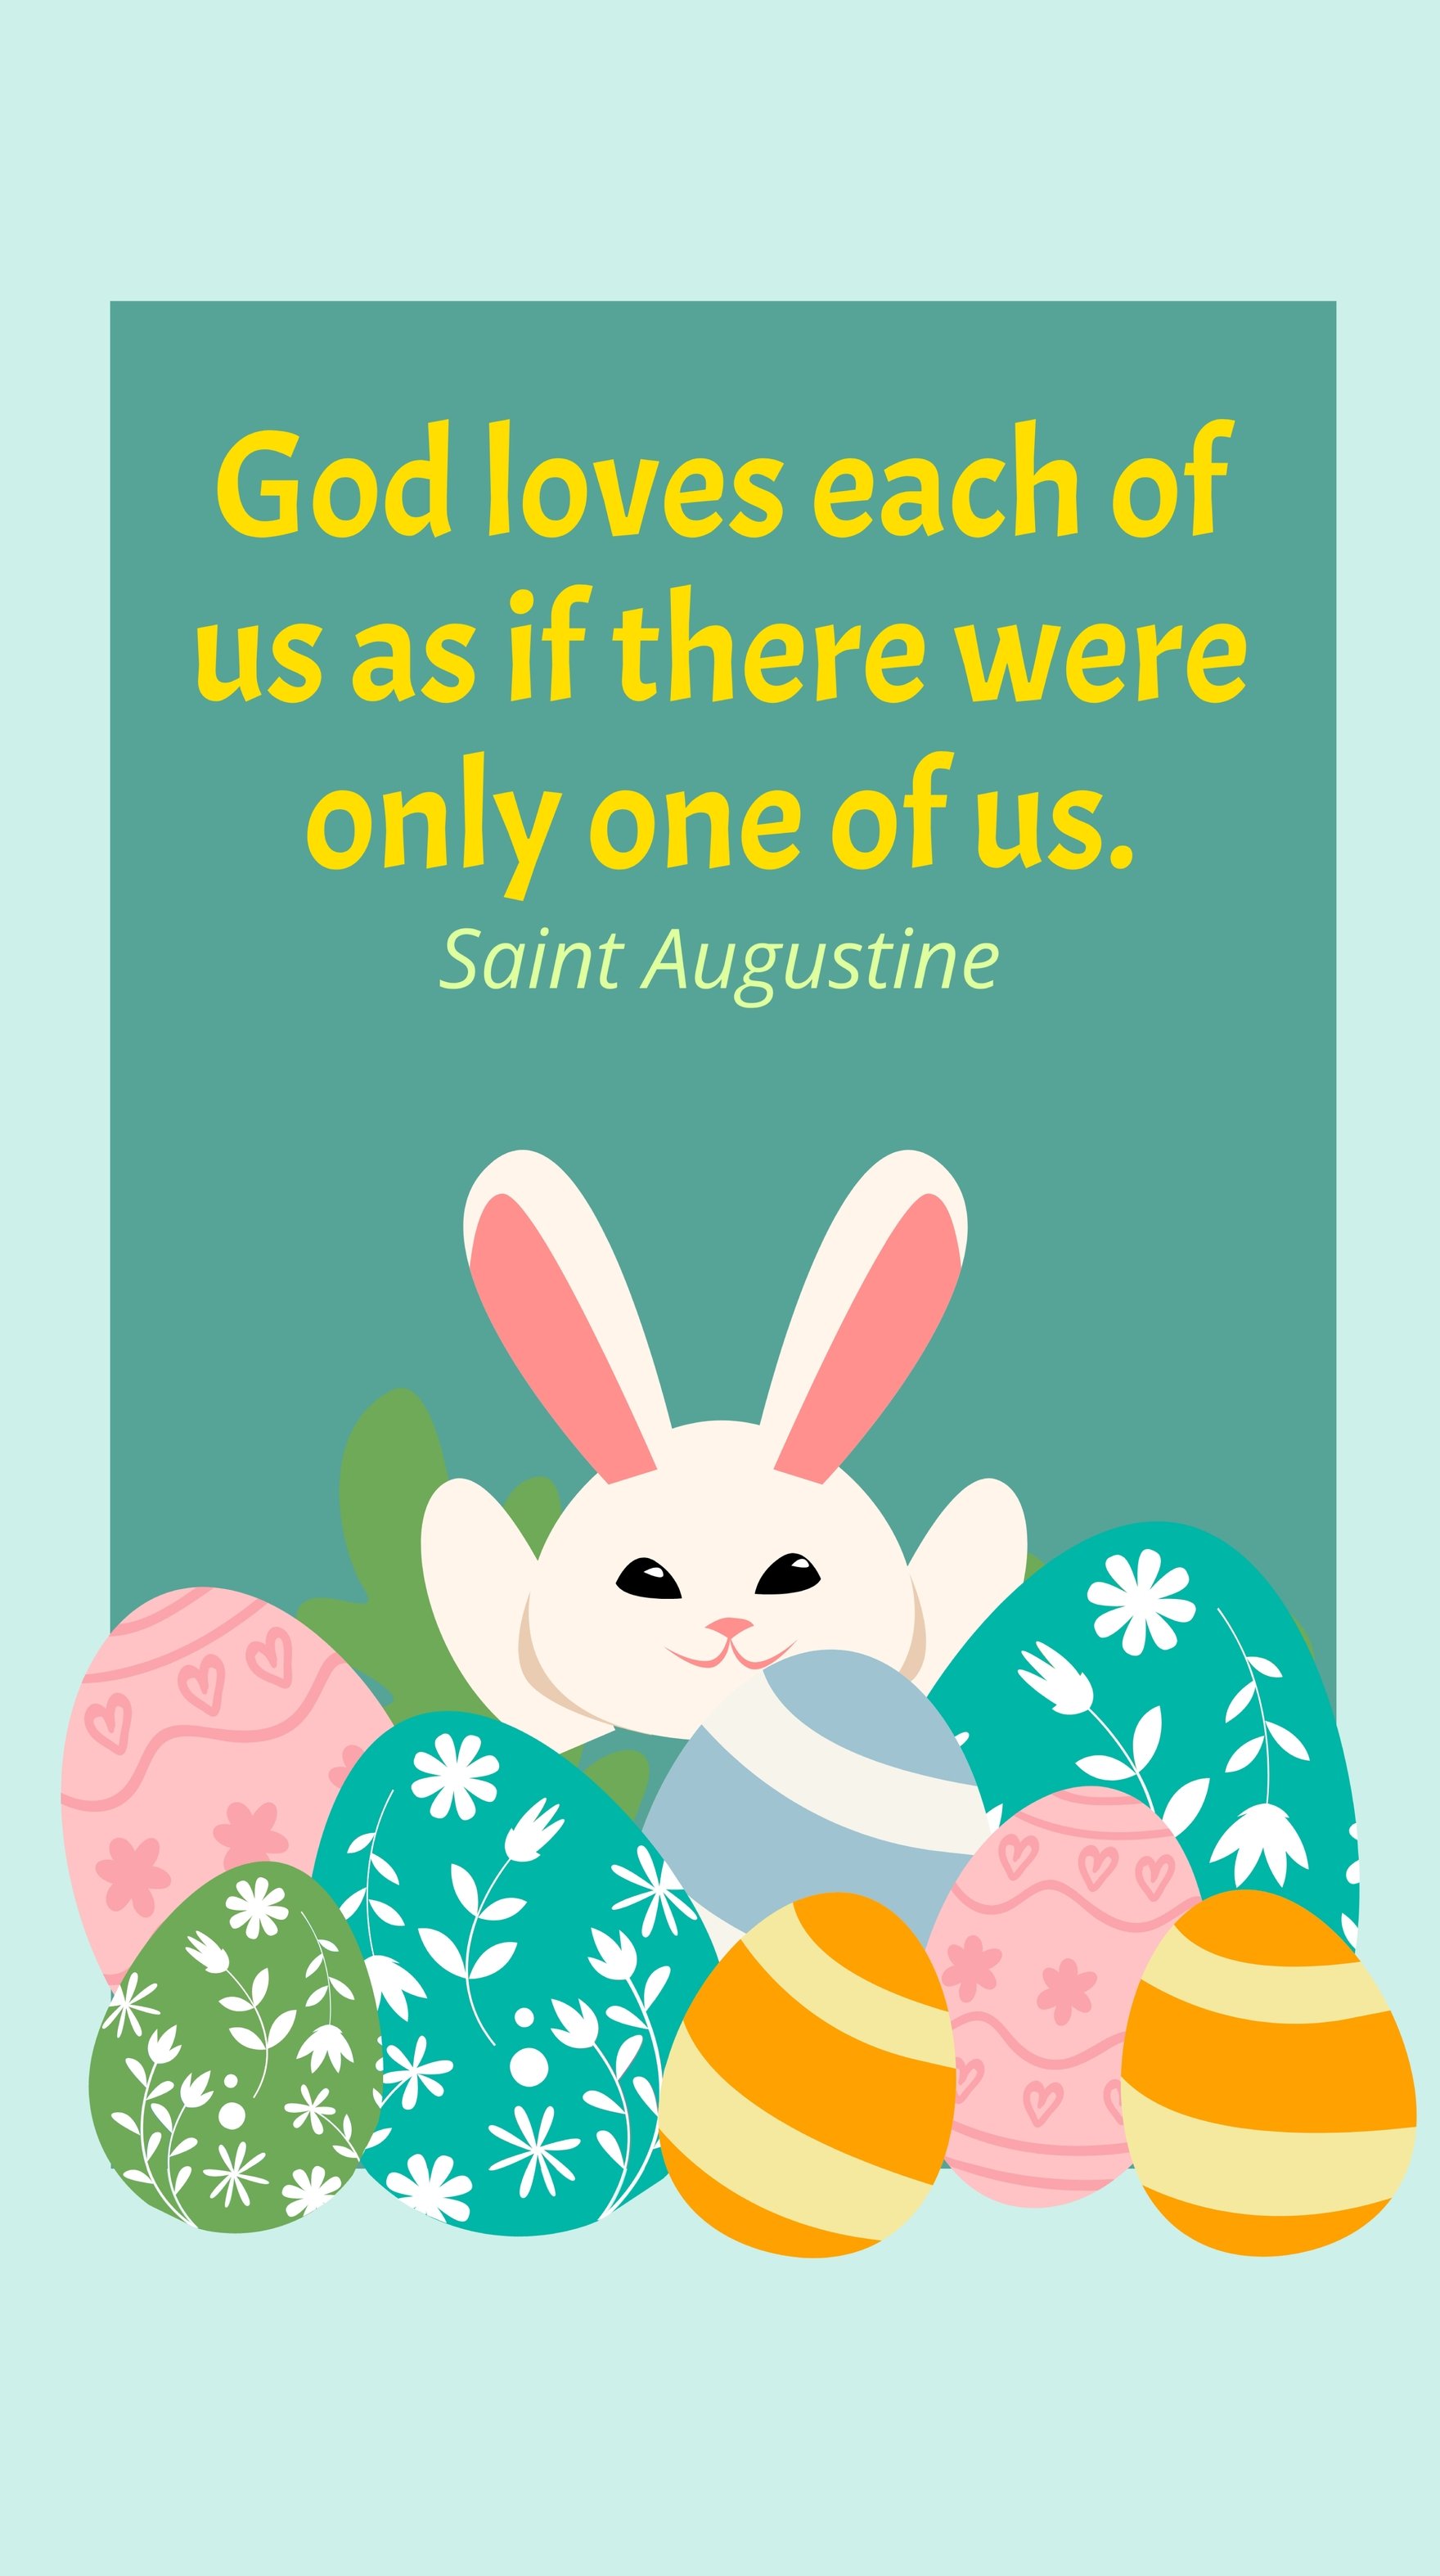 Saint Augustine - God loves each of us as if there were only one of us.